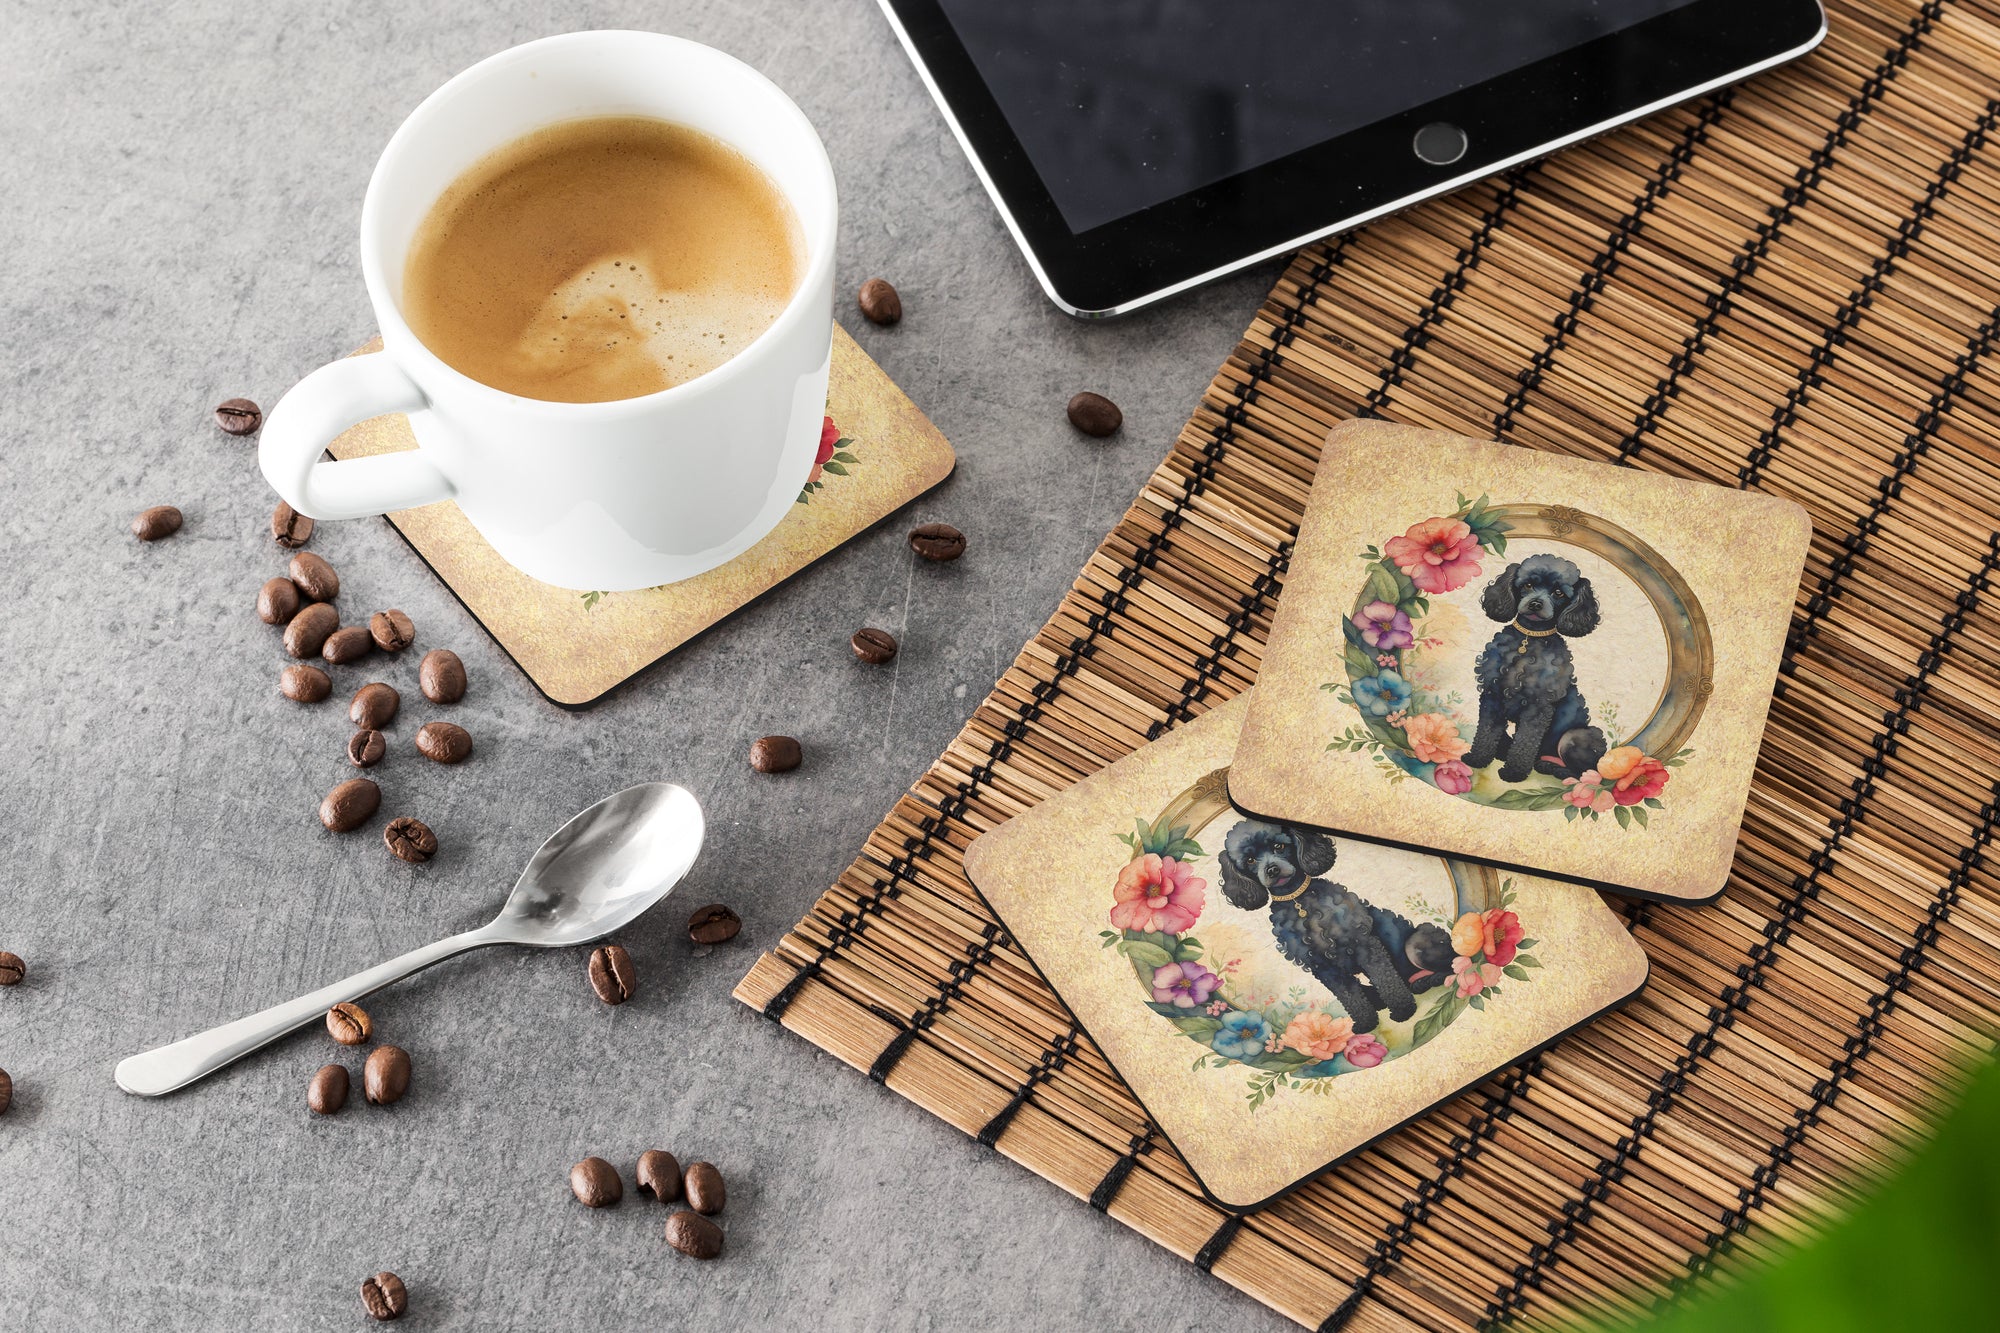 Black Poodle and Flowers Foam Coasters